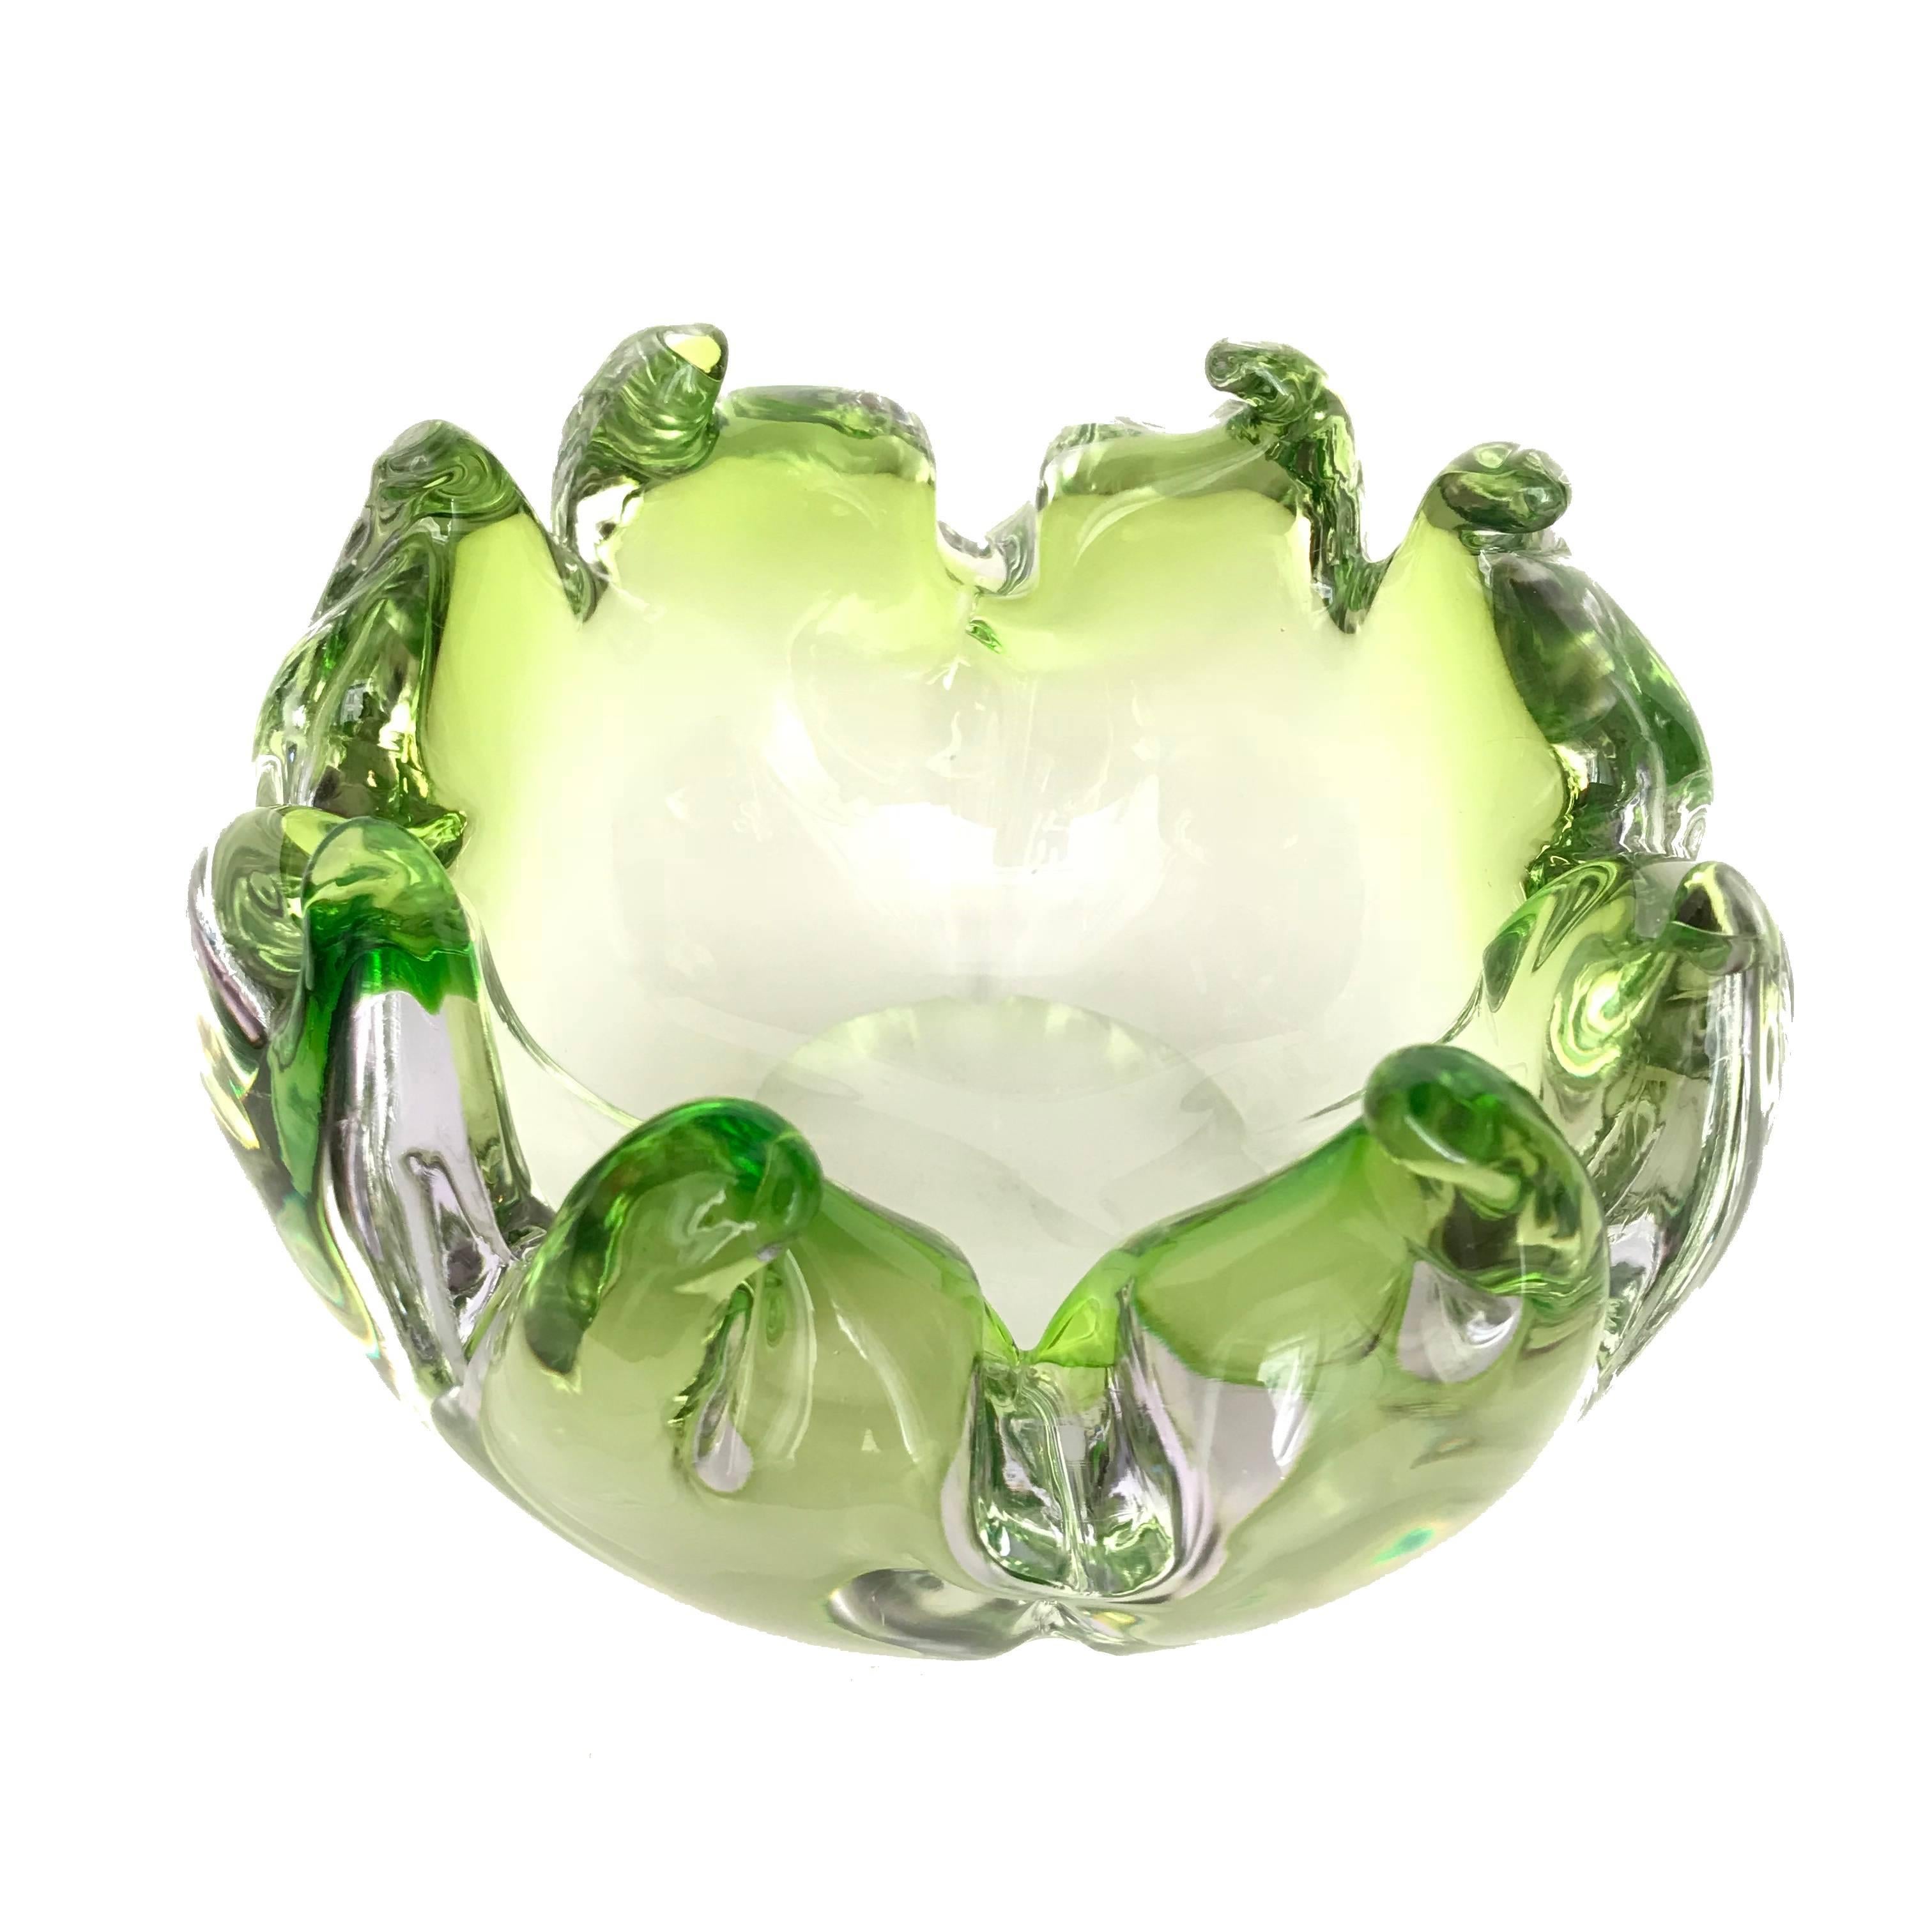 Midcentury Twisted Flame Blown Green Murano Art Glass Bowl, Italy, 1950s